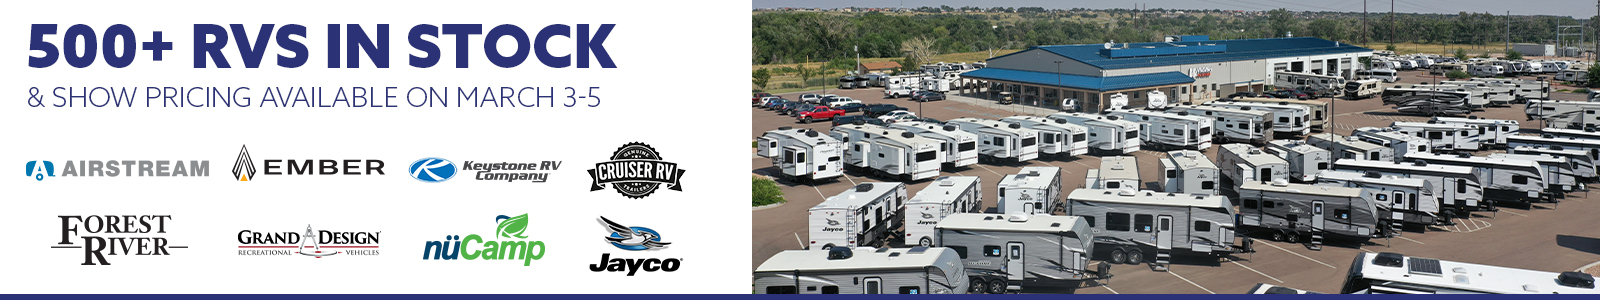 500+ RVs in stock with special show pricing